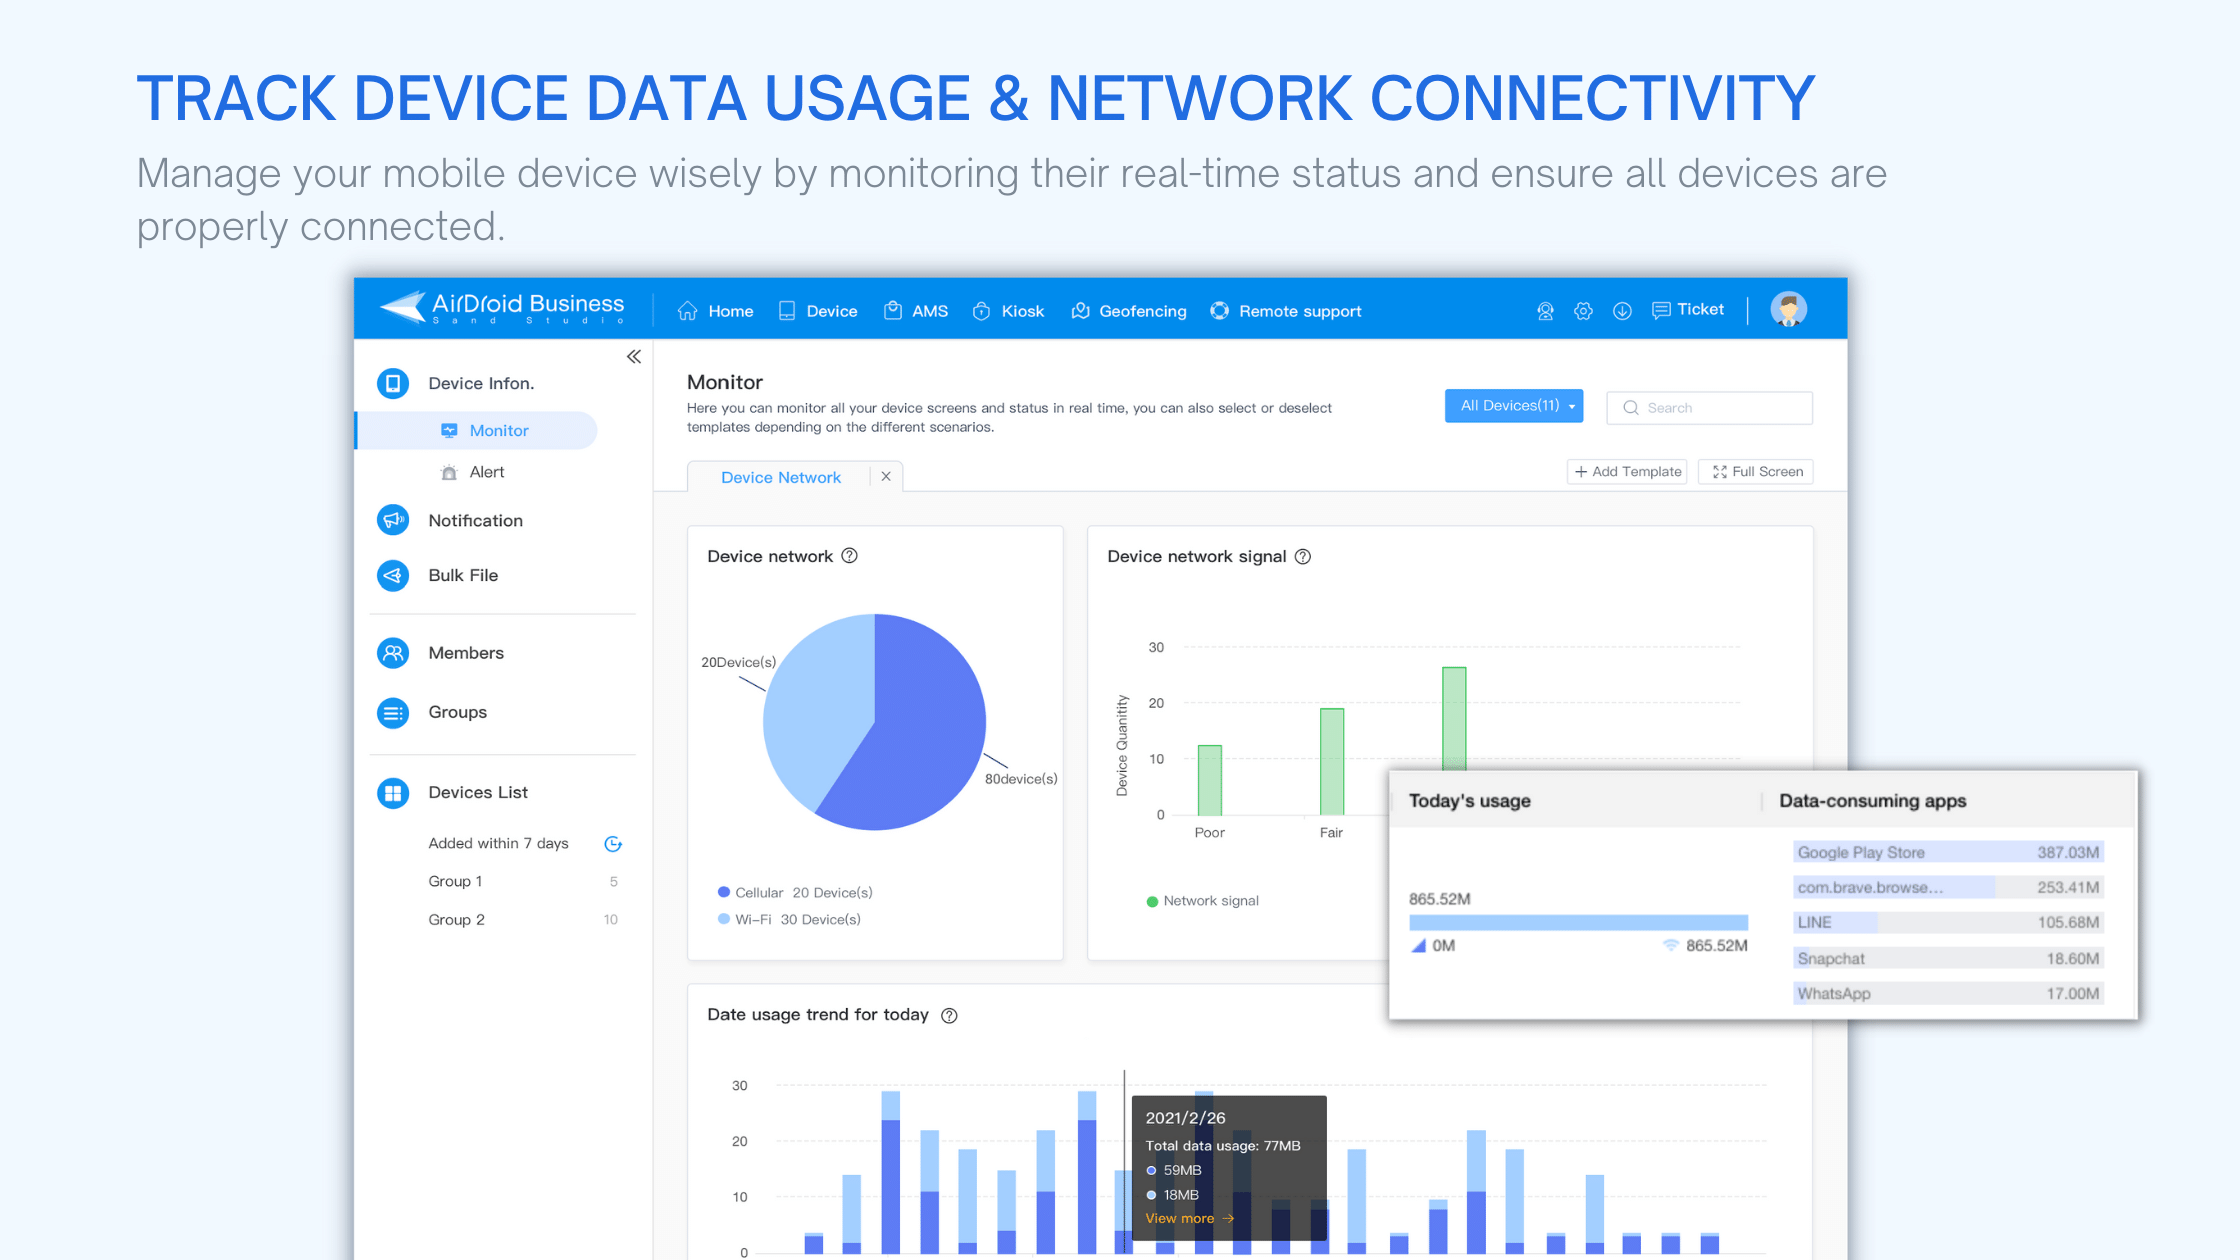 Track all your devices' data usage and network status in AirDroid Business device dashboard